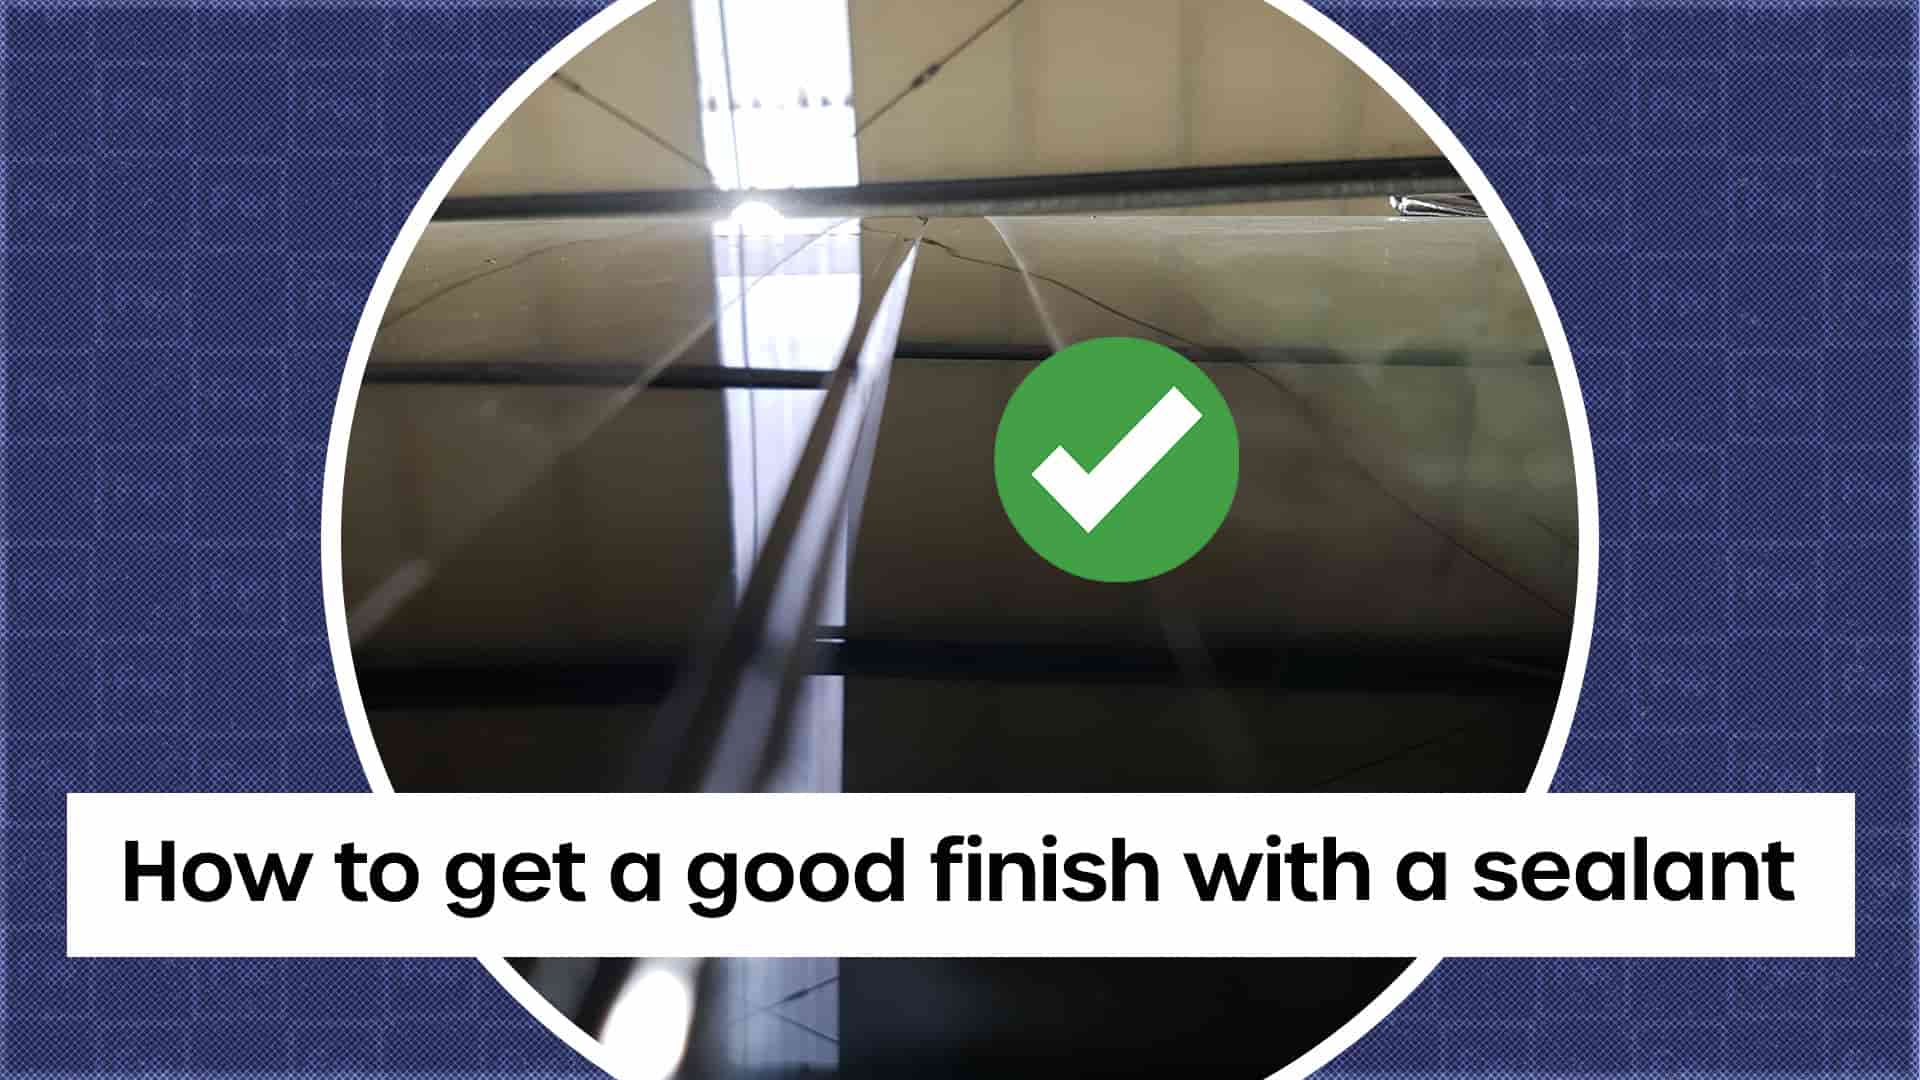 Video: How to get a good finish with a sealant - Forgeway Ltd